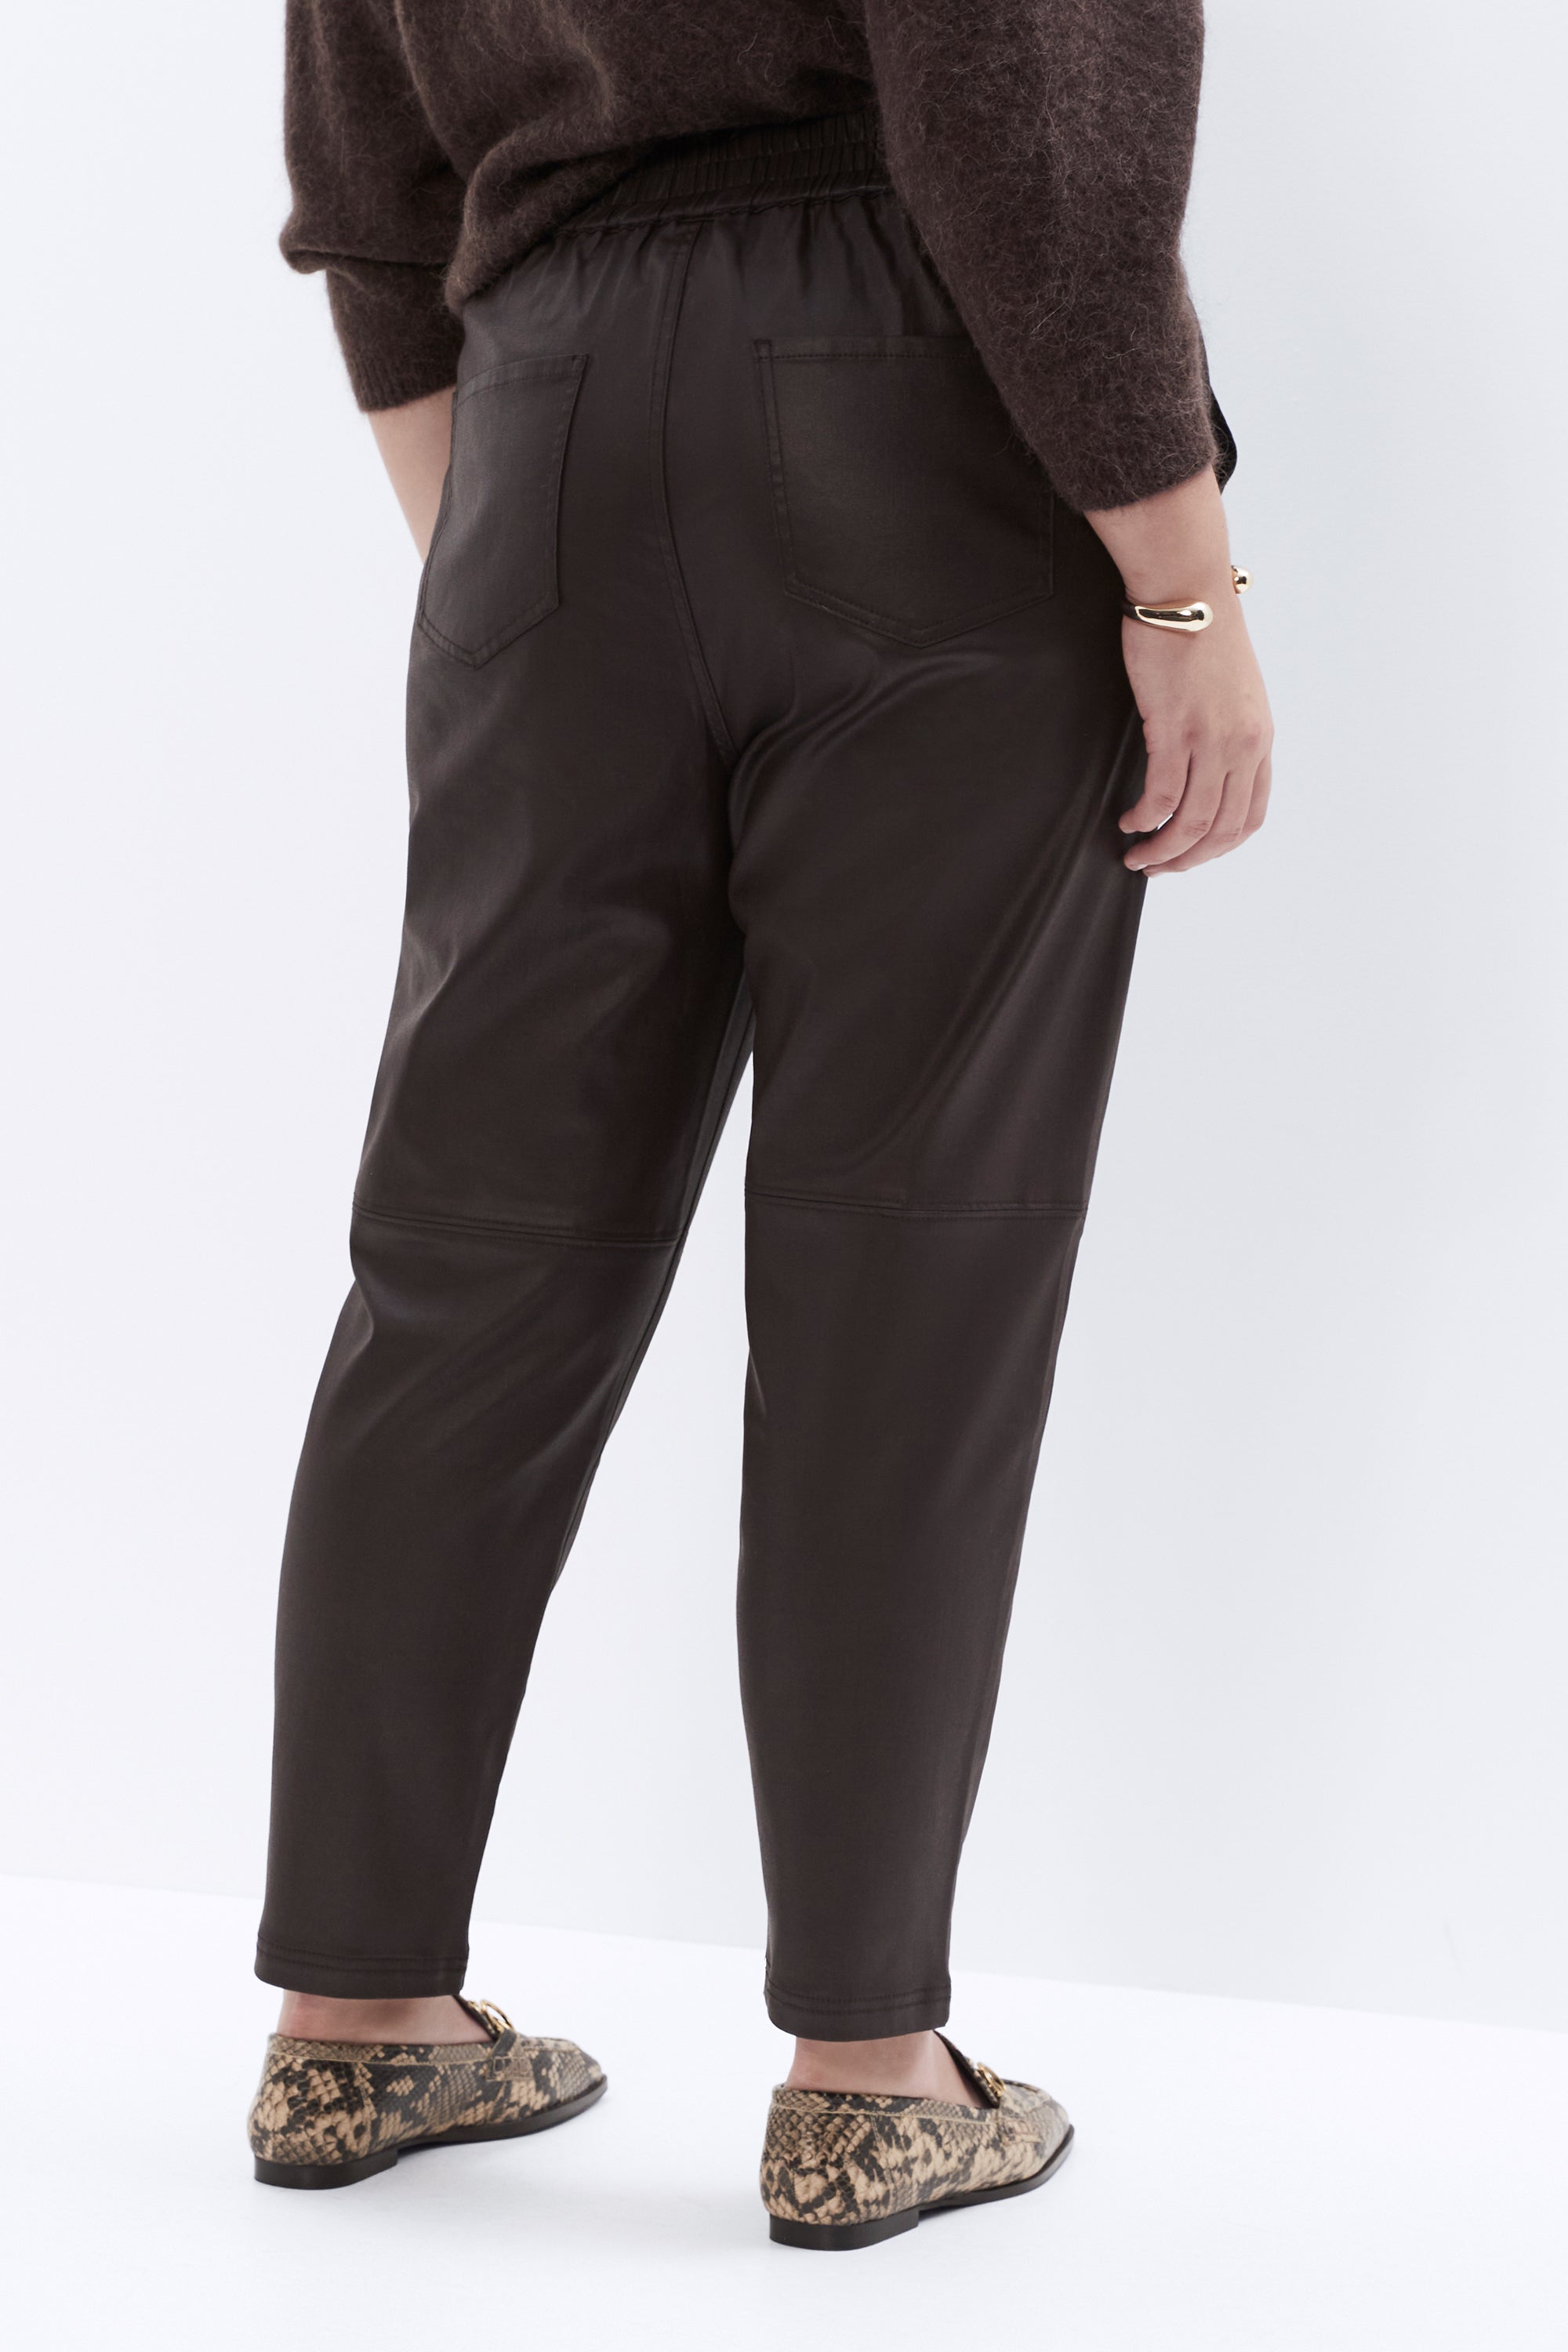 Women's Casual Pants & Work Trousers - Unison